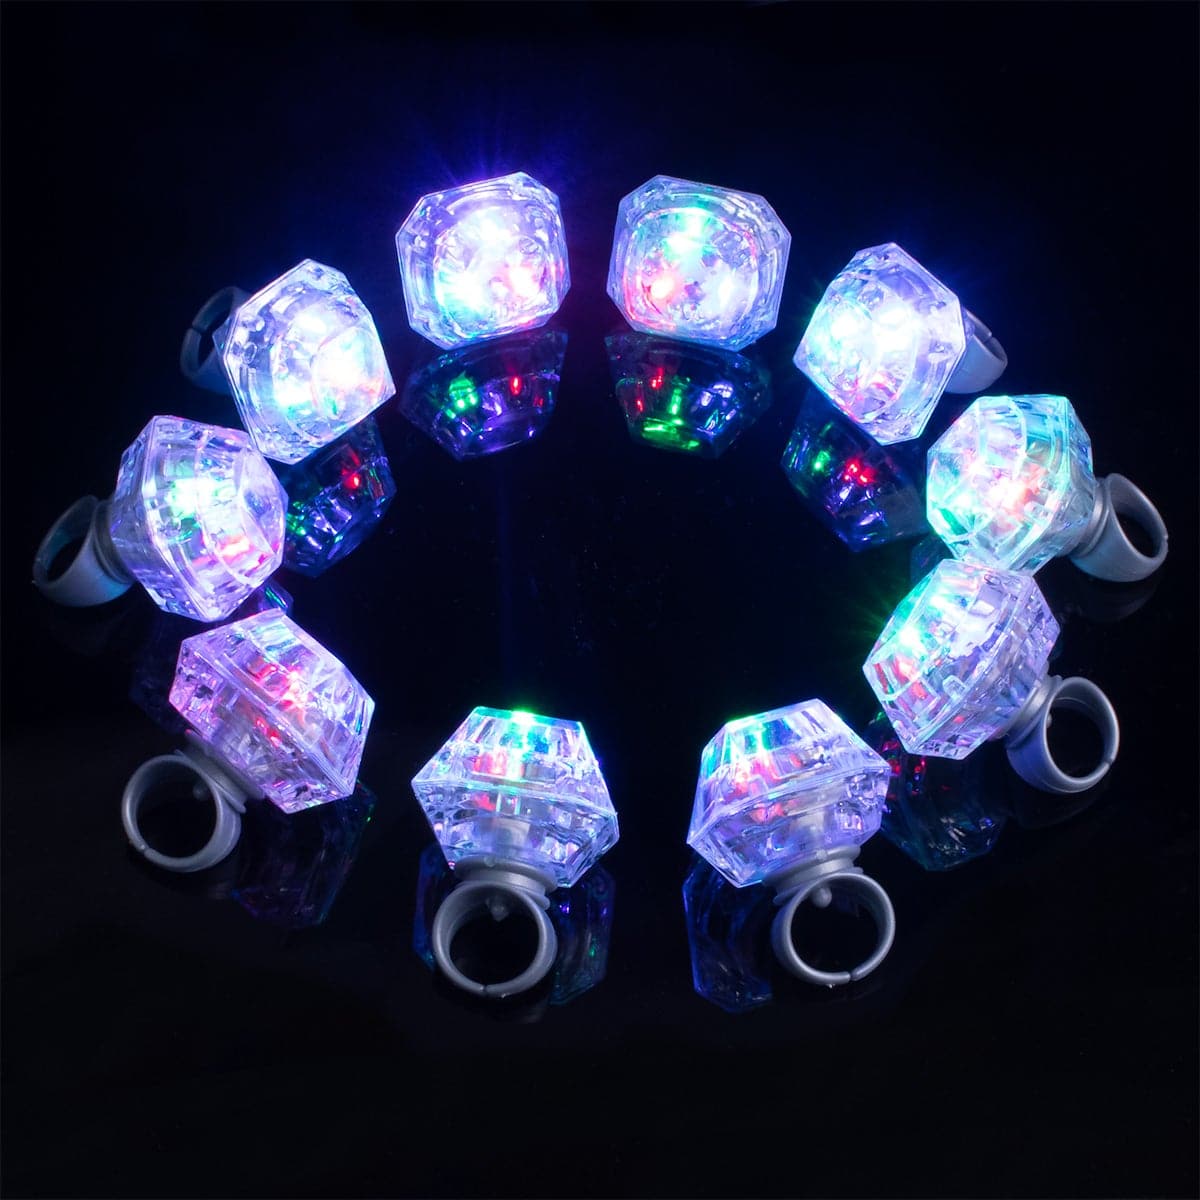 Set of 10 LED Diamond Light Up Rings - Retro Toys, Party Favors, Bachelorette Party Decorations, Bachelorette Party Favors, Bachelorette Party Supplies, Flashing LED Light Up Toy - Mrs... At Last!™